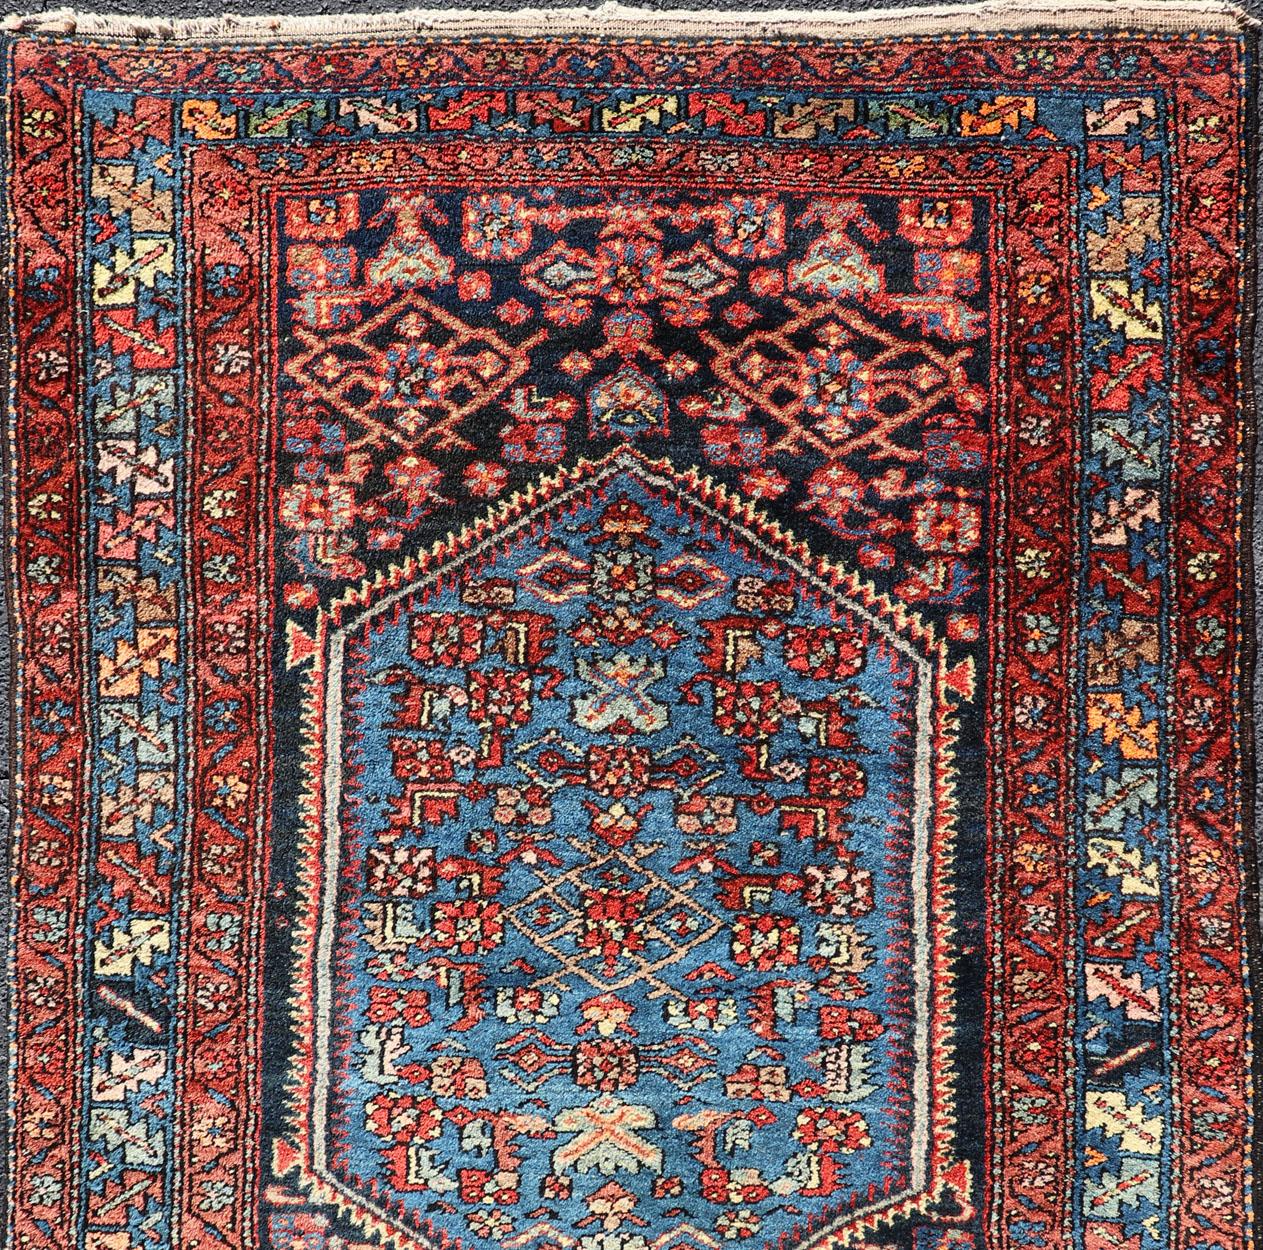 Antique Bidjar Persian carpet with center medallion with variety of blue colors, red, and salmon
rug/R20-1104 origin/Iran antique Bijar

Persian Bidjar carpets are renowned for their superior wool, great workmanship and use of beautiful colors.